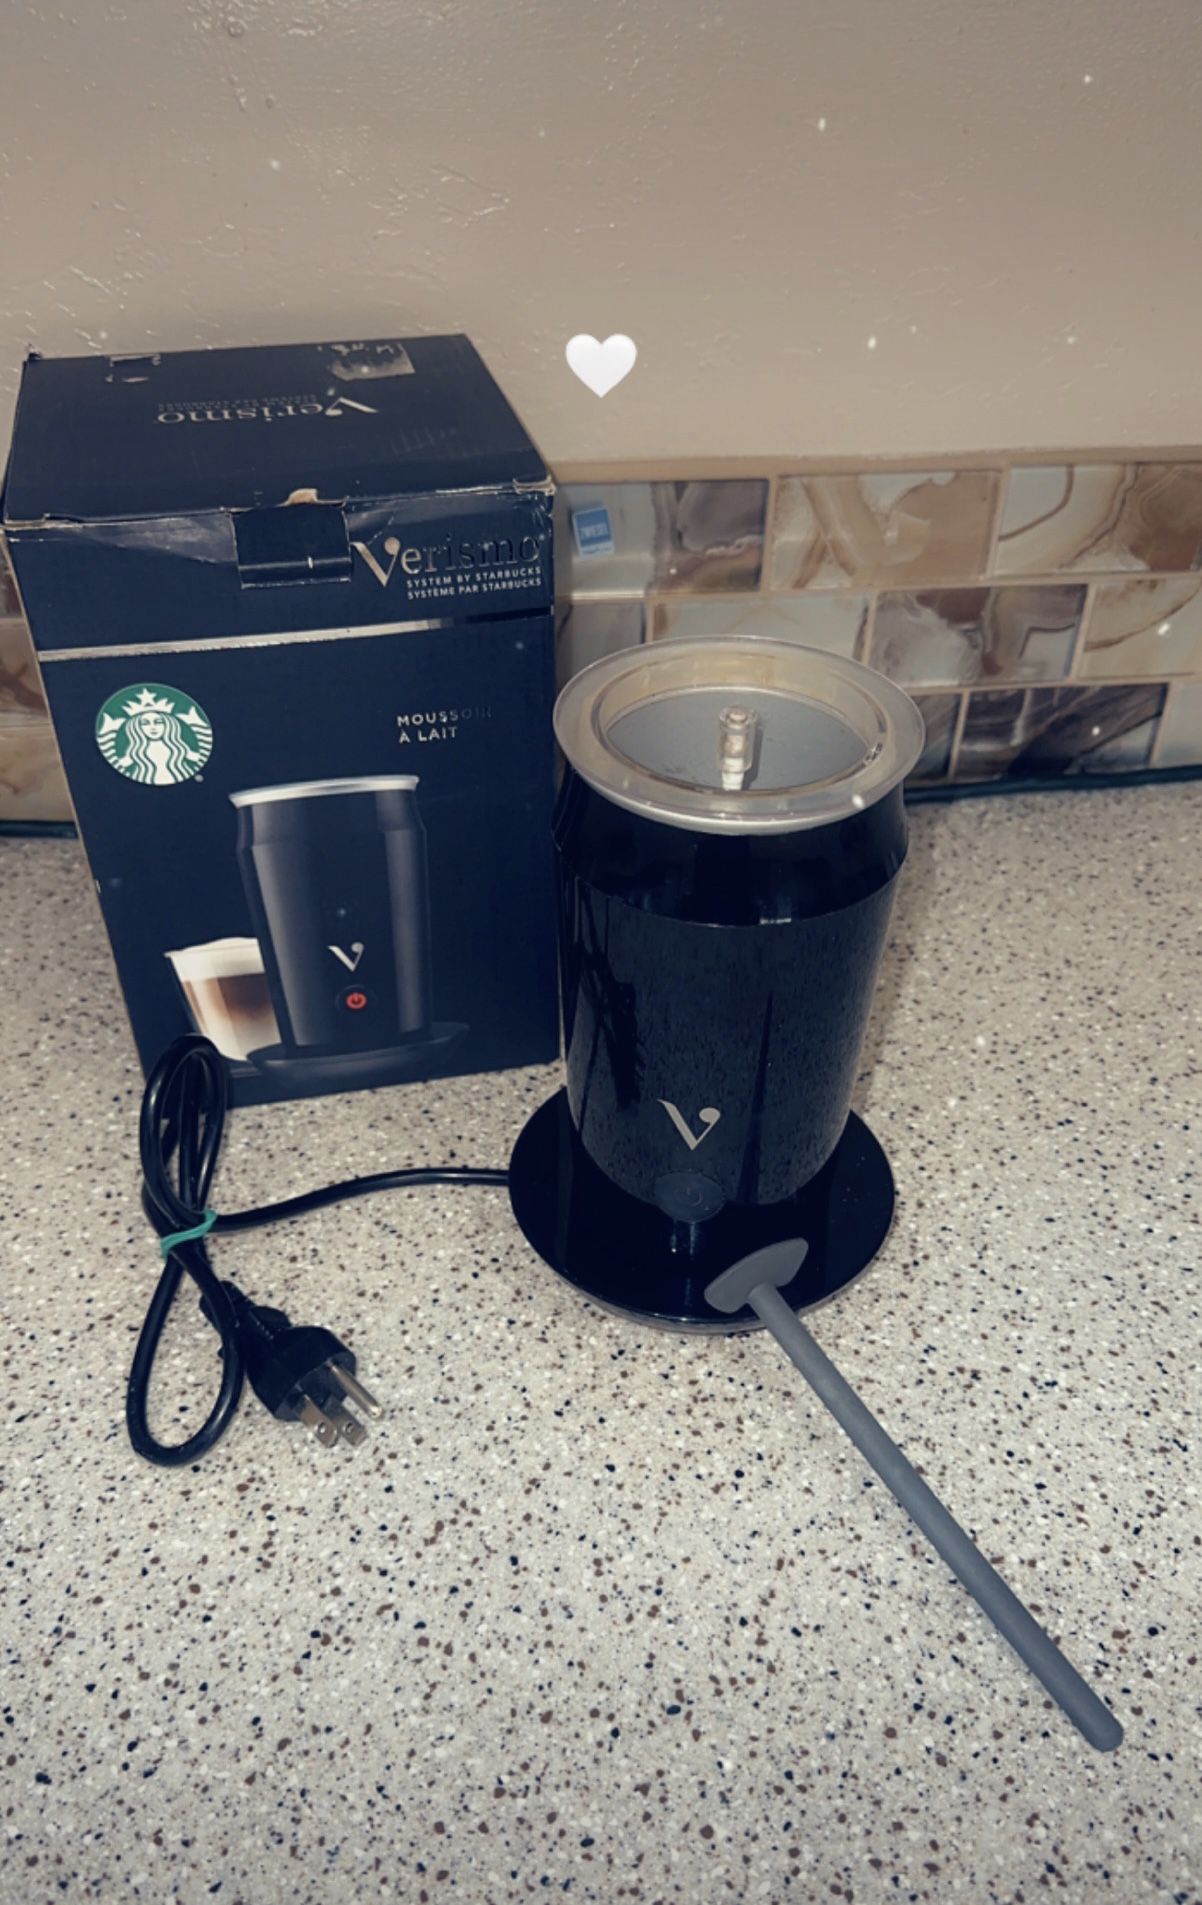 Starbucks Verismo Milk Frother  Milk frother, Frother, Ice cream